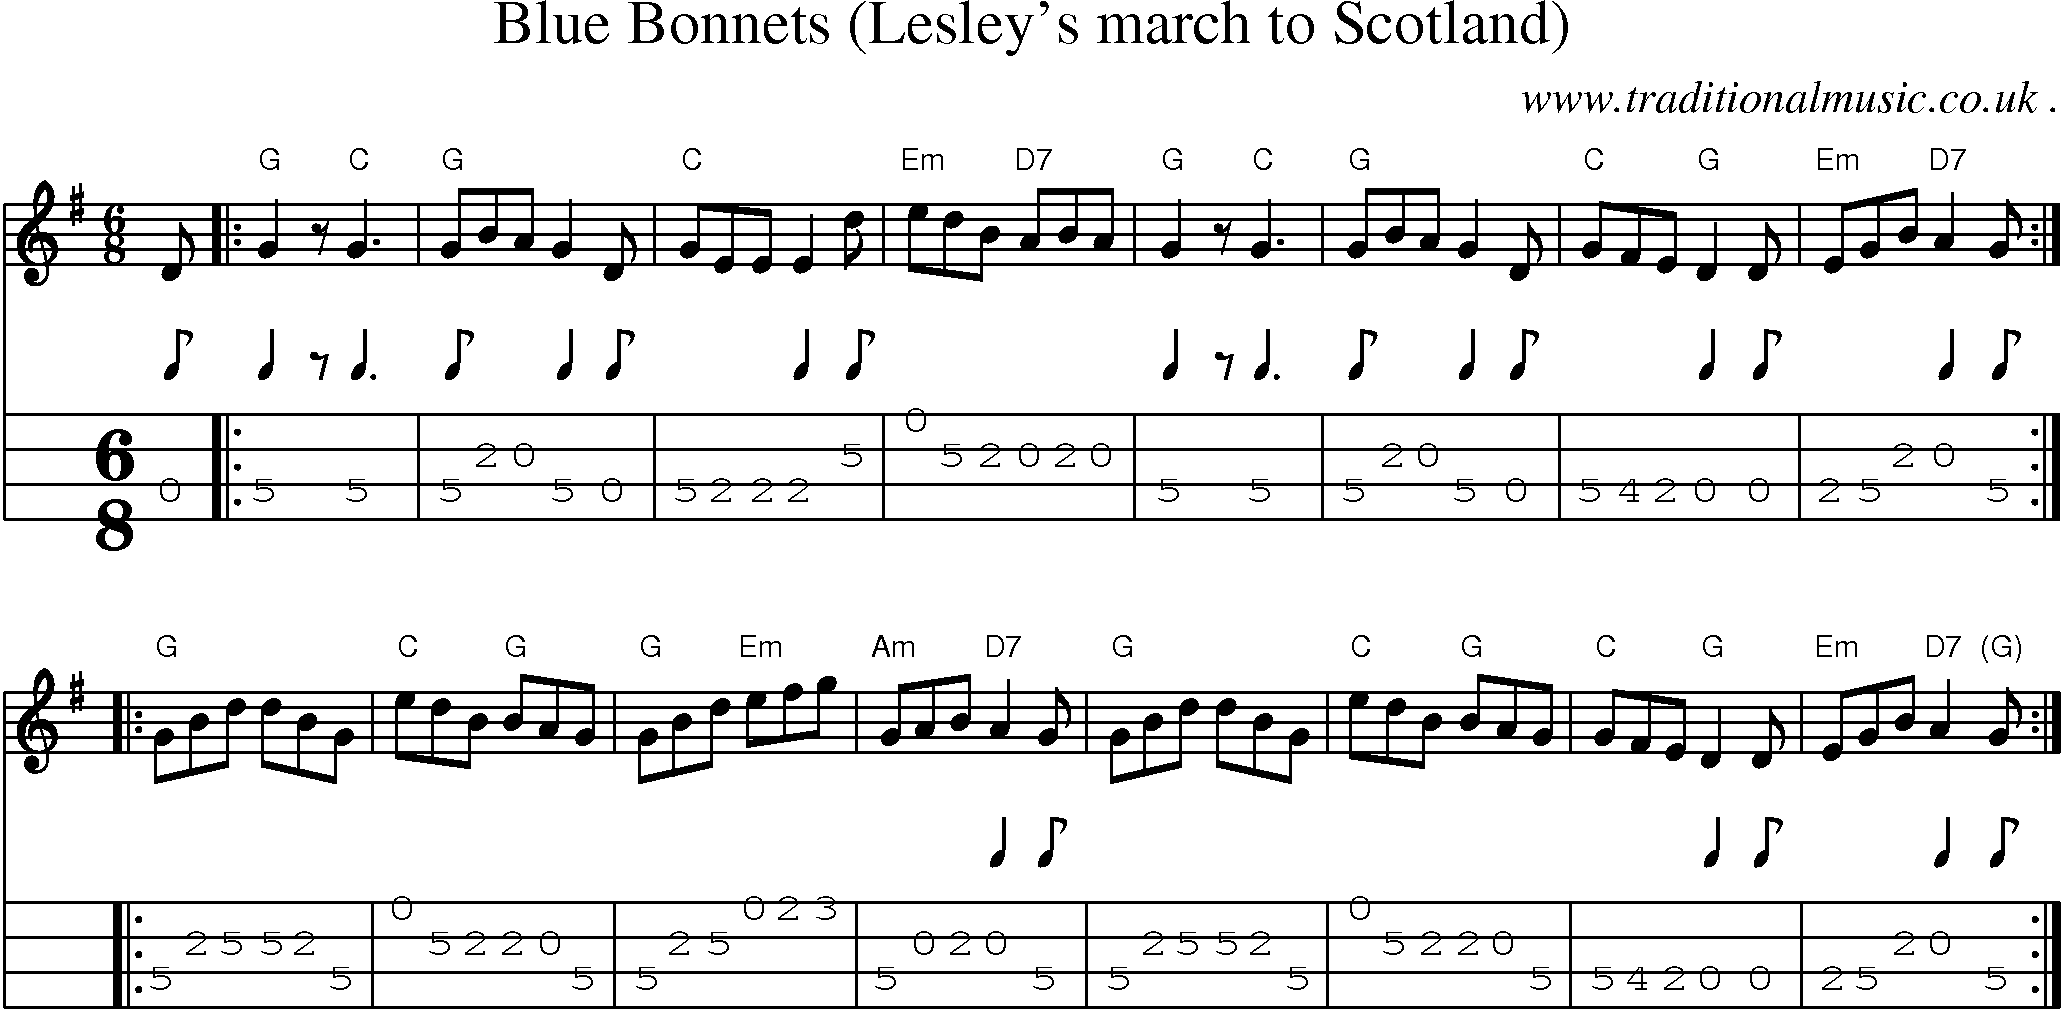 Sheet-music  score, Chords and Mandolin Tabs for Blue Bonnets Lesleys March To Scotland